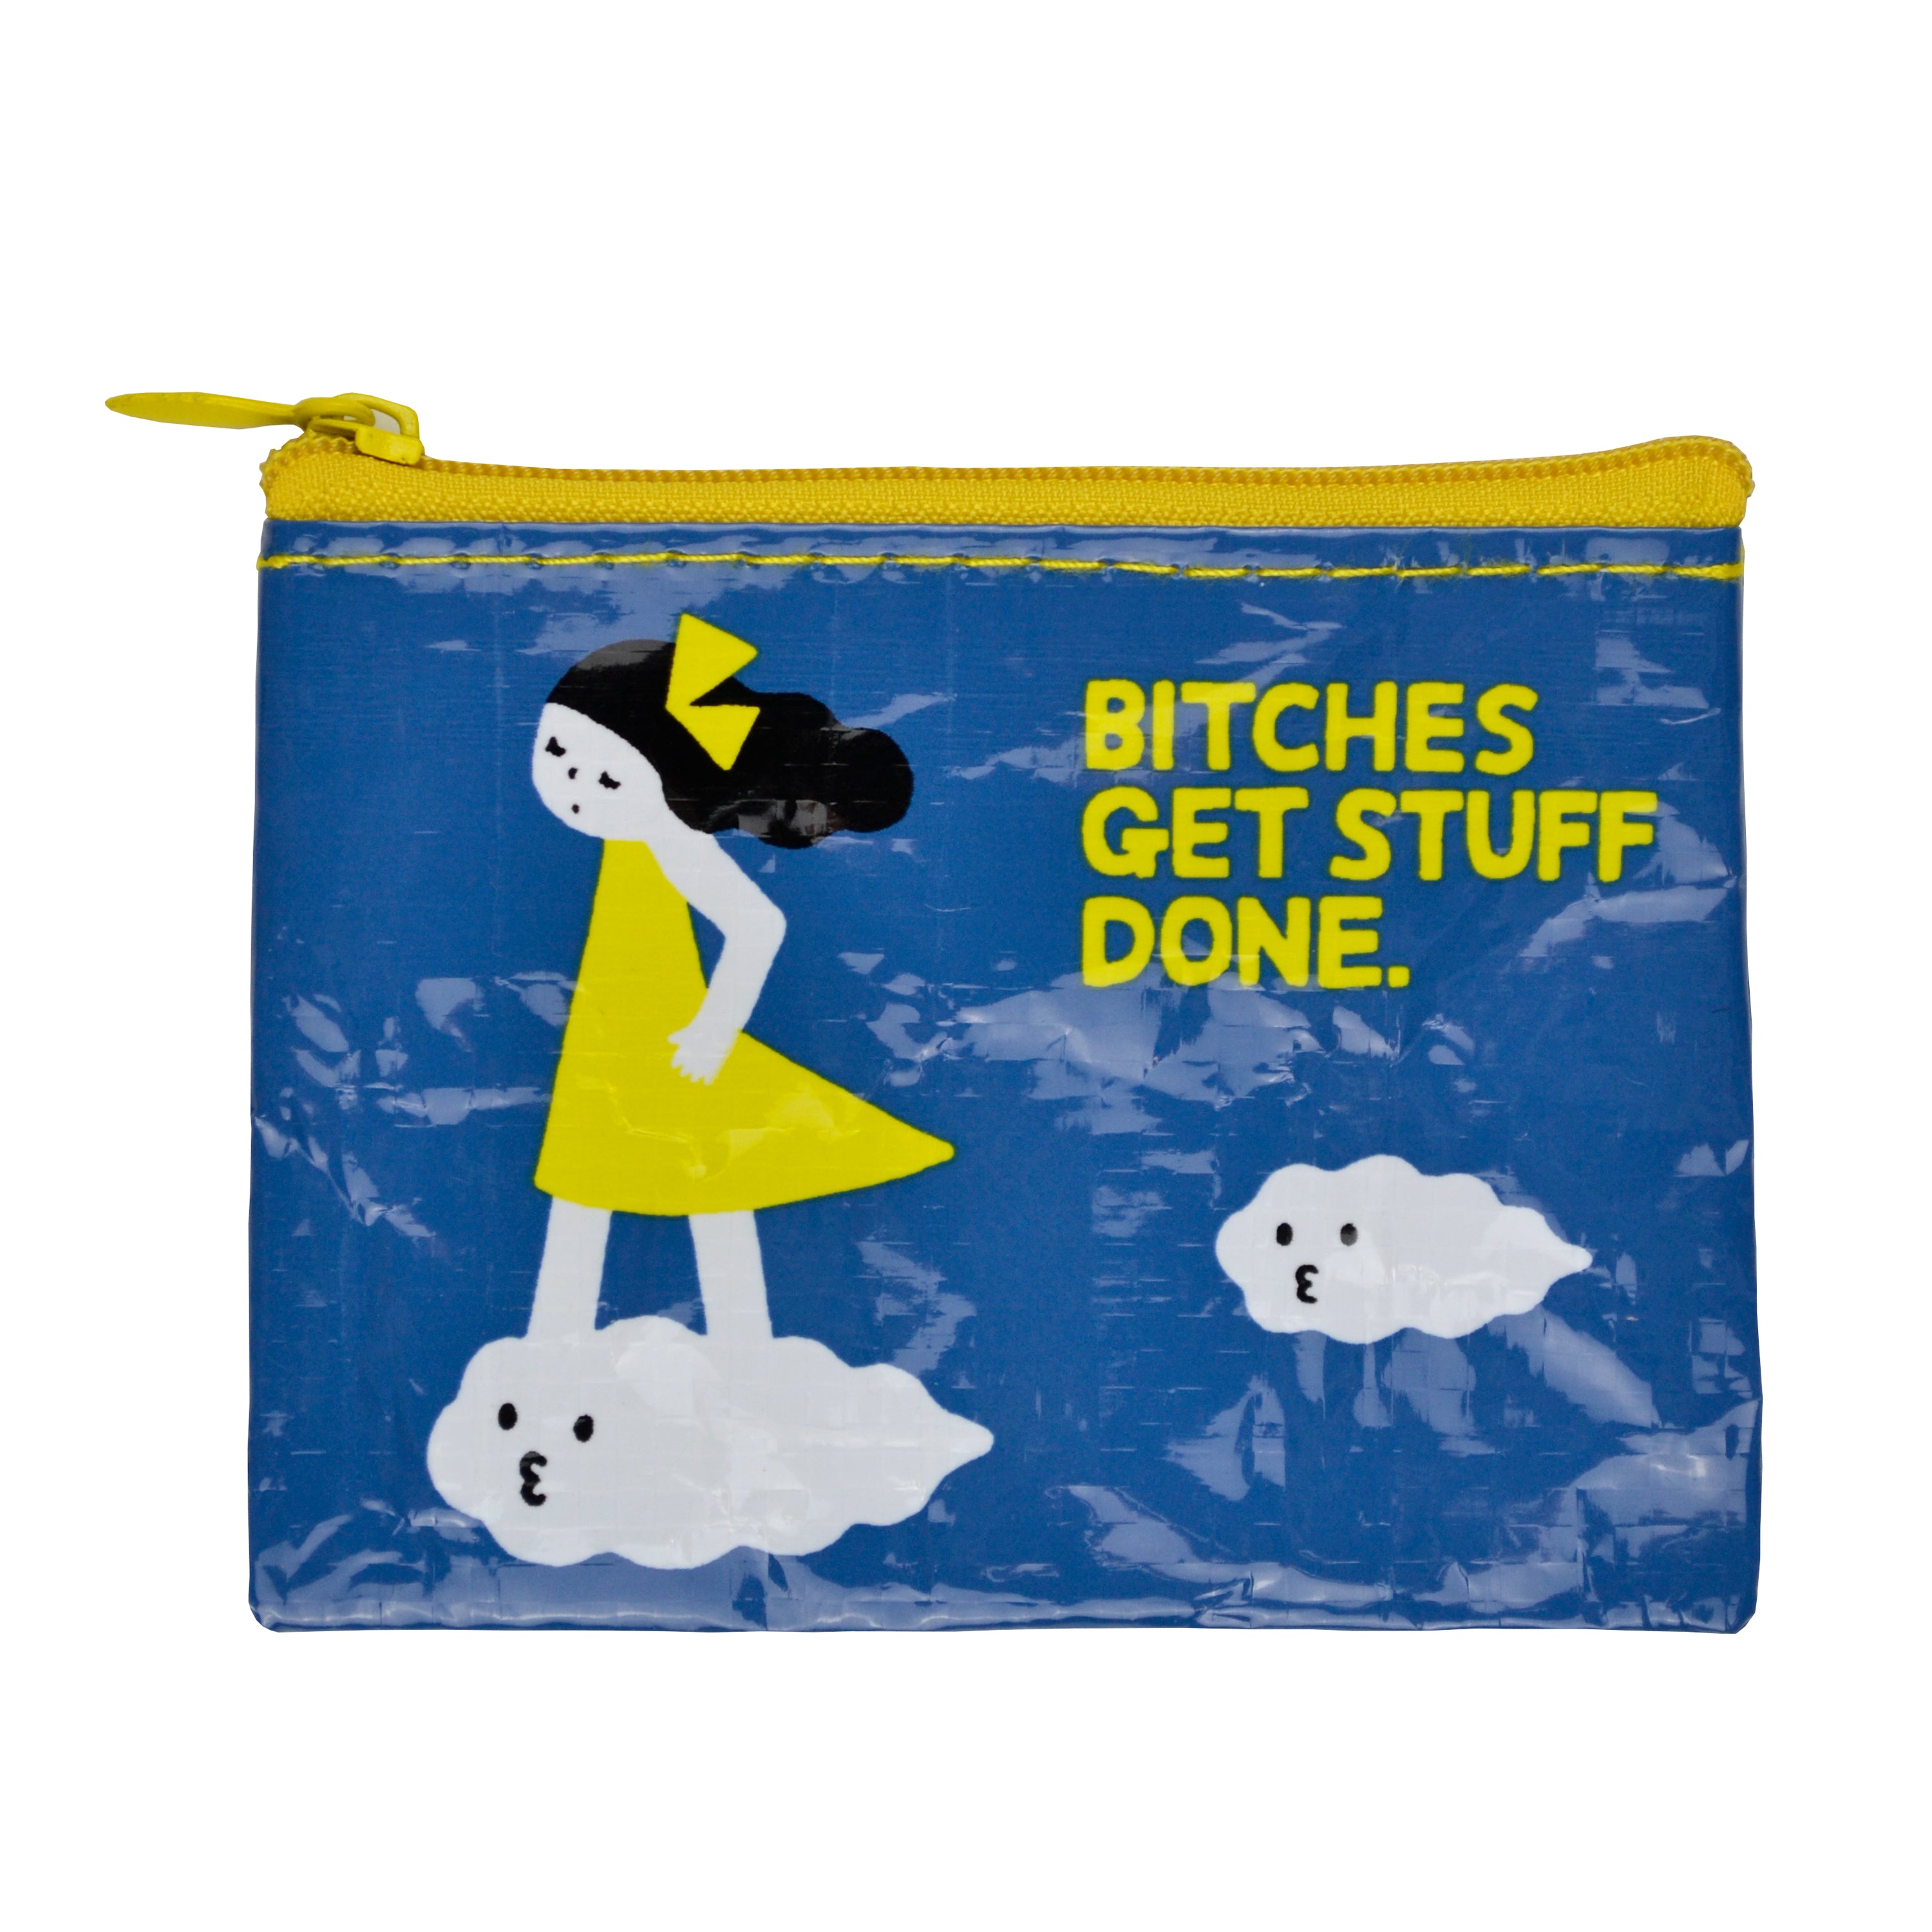 A small blue coin purse with yellow zipper featuring a woman in a yellow dress with dark hair riding a cloud. Yellow text on the purse reads 